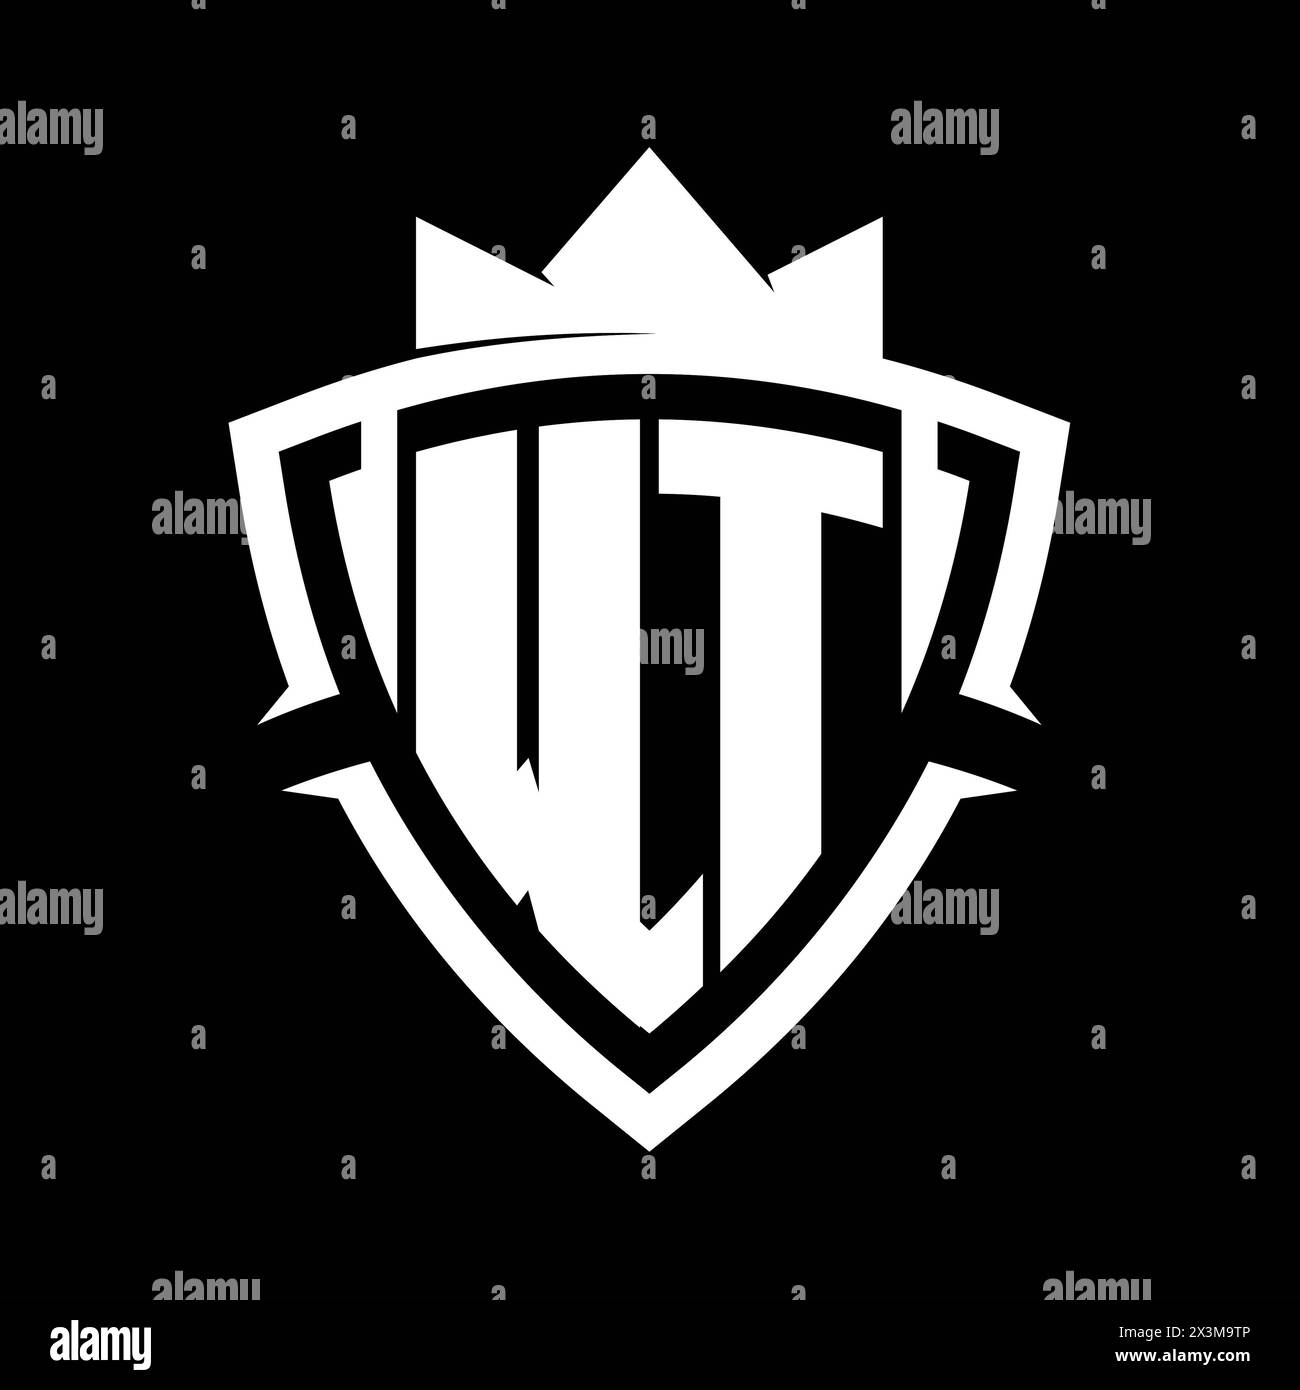 WT Letter bold monogram with triangle curve shield shape with crown white and black background color design template Stock Photo